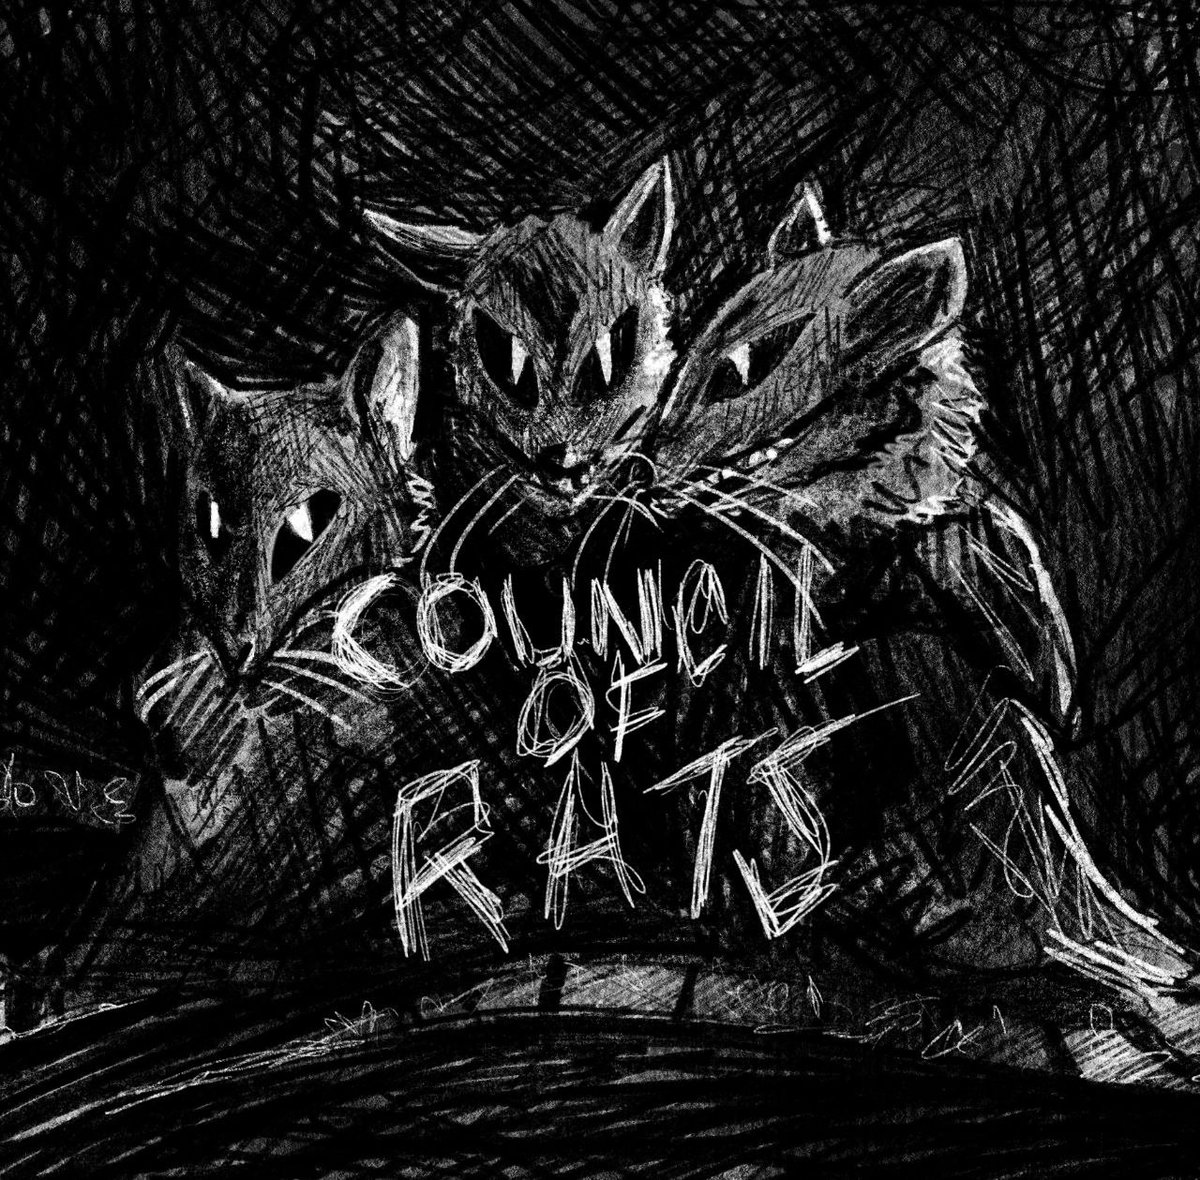 One week today I'll be releasing a single with @bicyclegang titled The Council Of Rats. The song is about how the parasitic elites have sunken their own ship and are trying to take us down with them My sister @ArtKayz whipped for some fitting art for the release! Stay tuned!